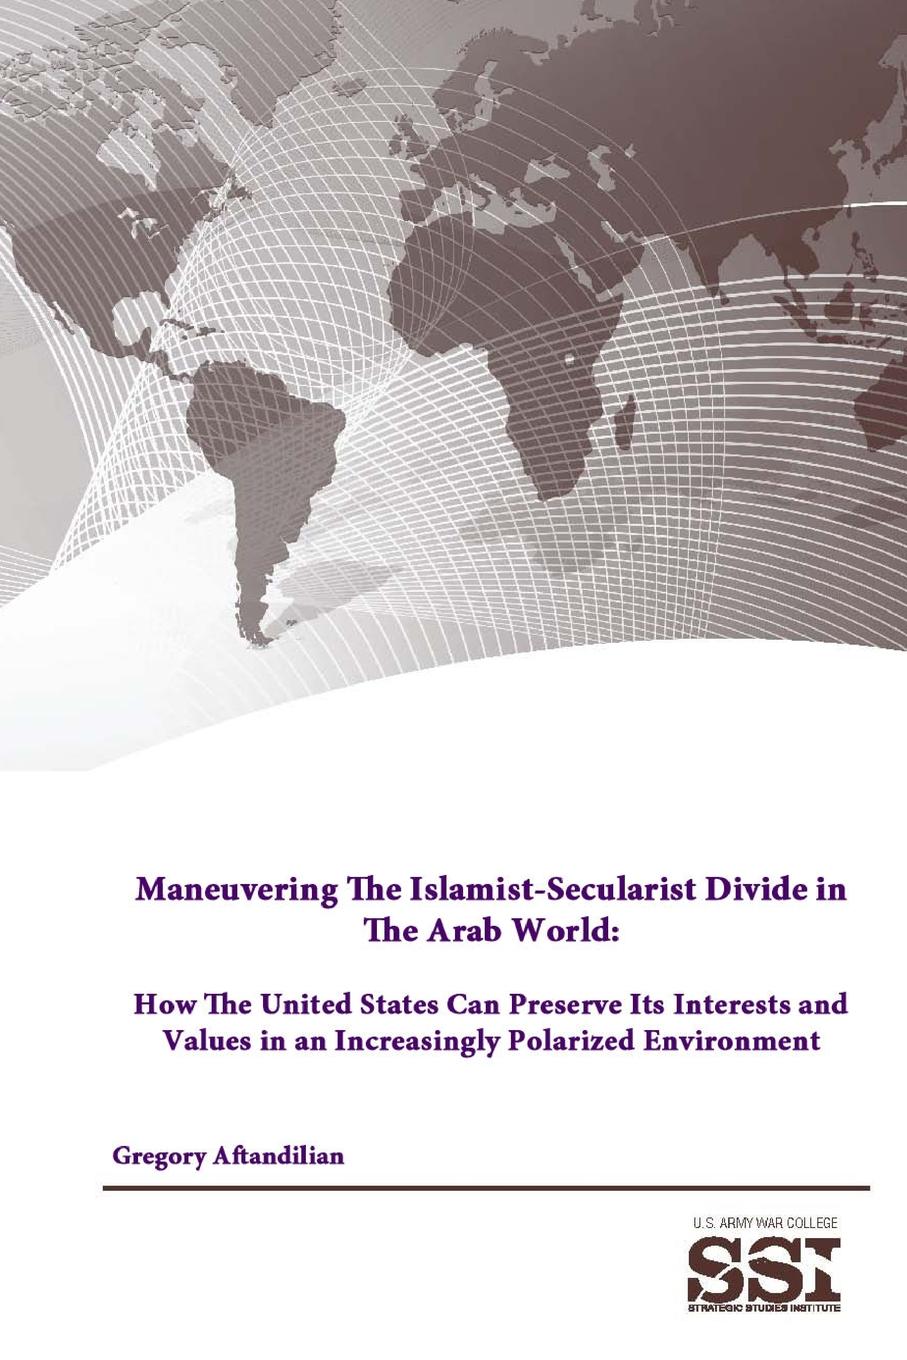 Maneuvering The Islamist-Secularist Divide in The Arab World. How The United States Can Preserve Its Interests and Values in an Increasingly Polarized Environment